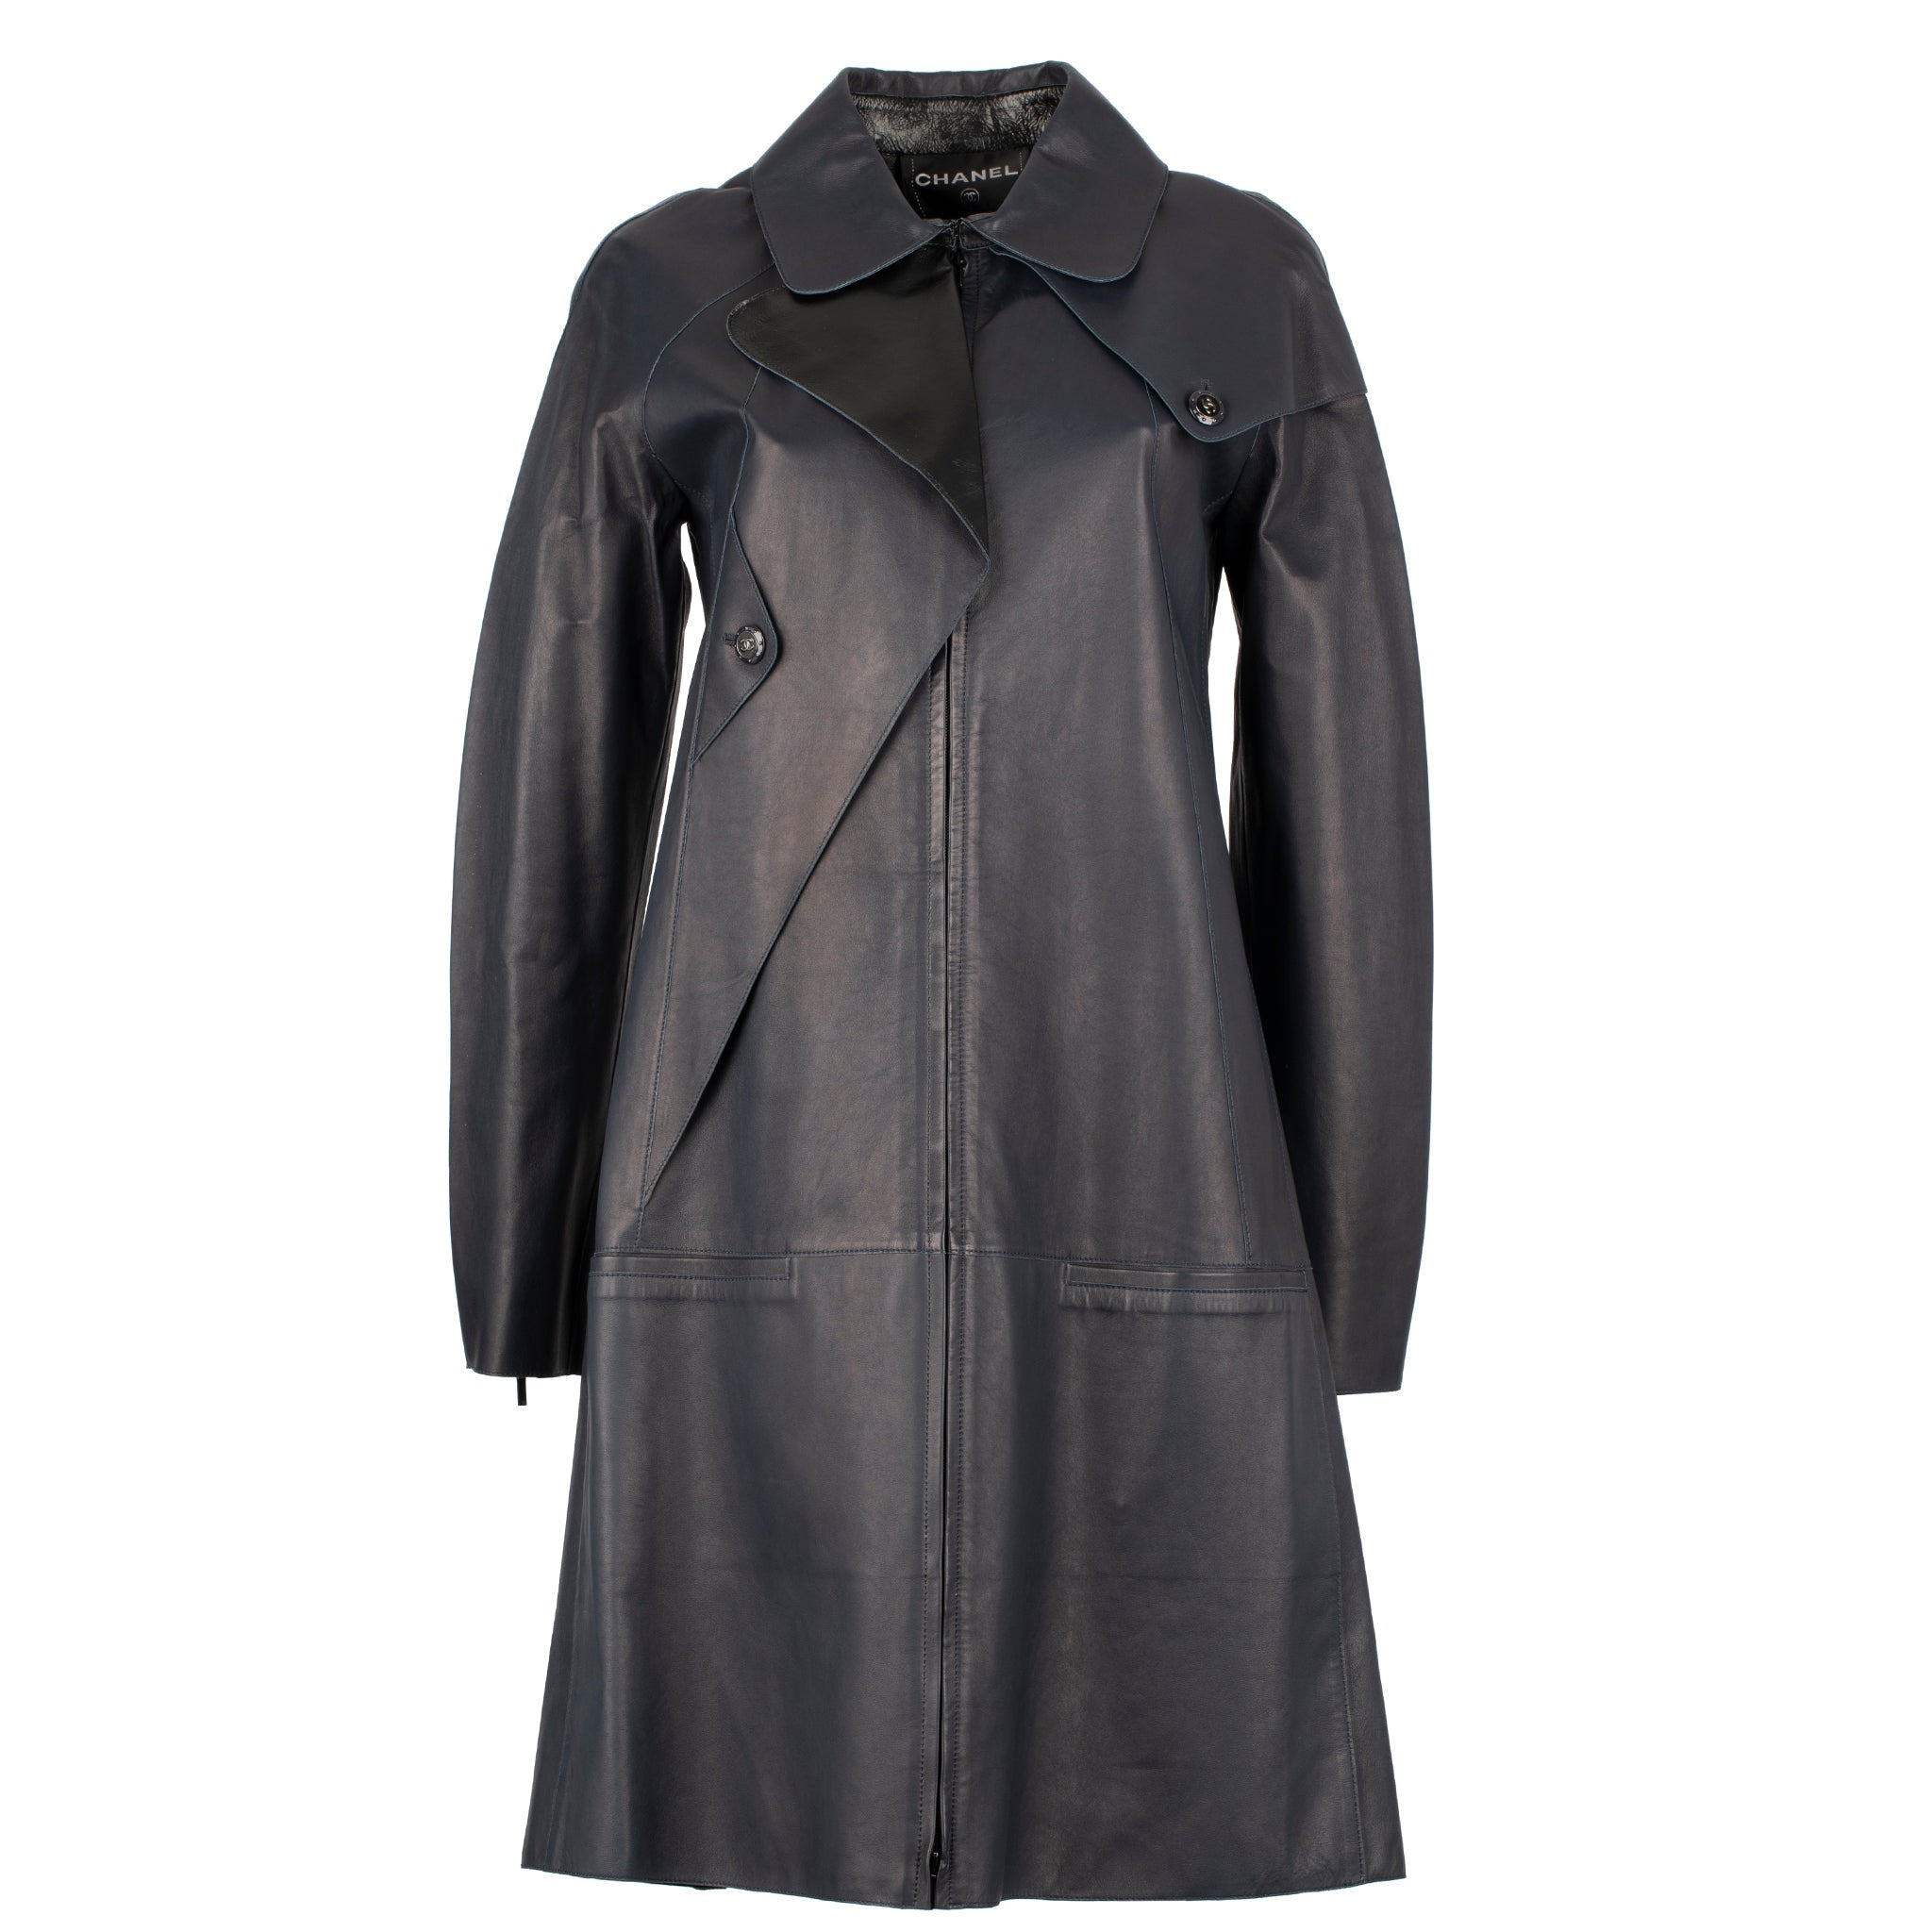 CHANEL NAVY & BLACK LEATHER TRENCH WITH ZIP 38 FR - On Repeat